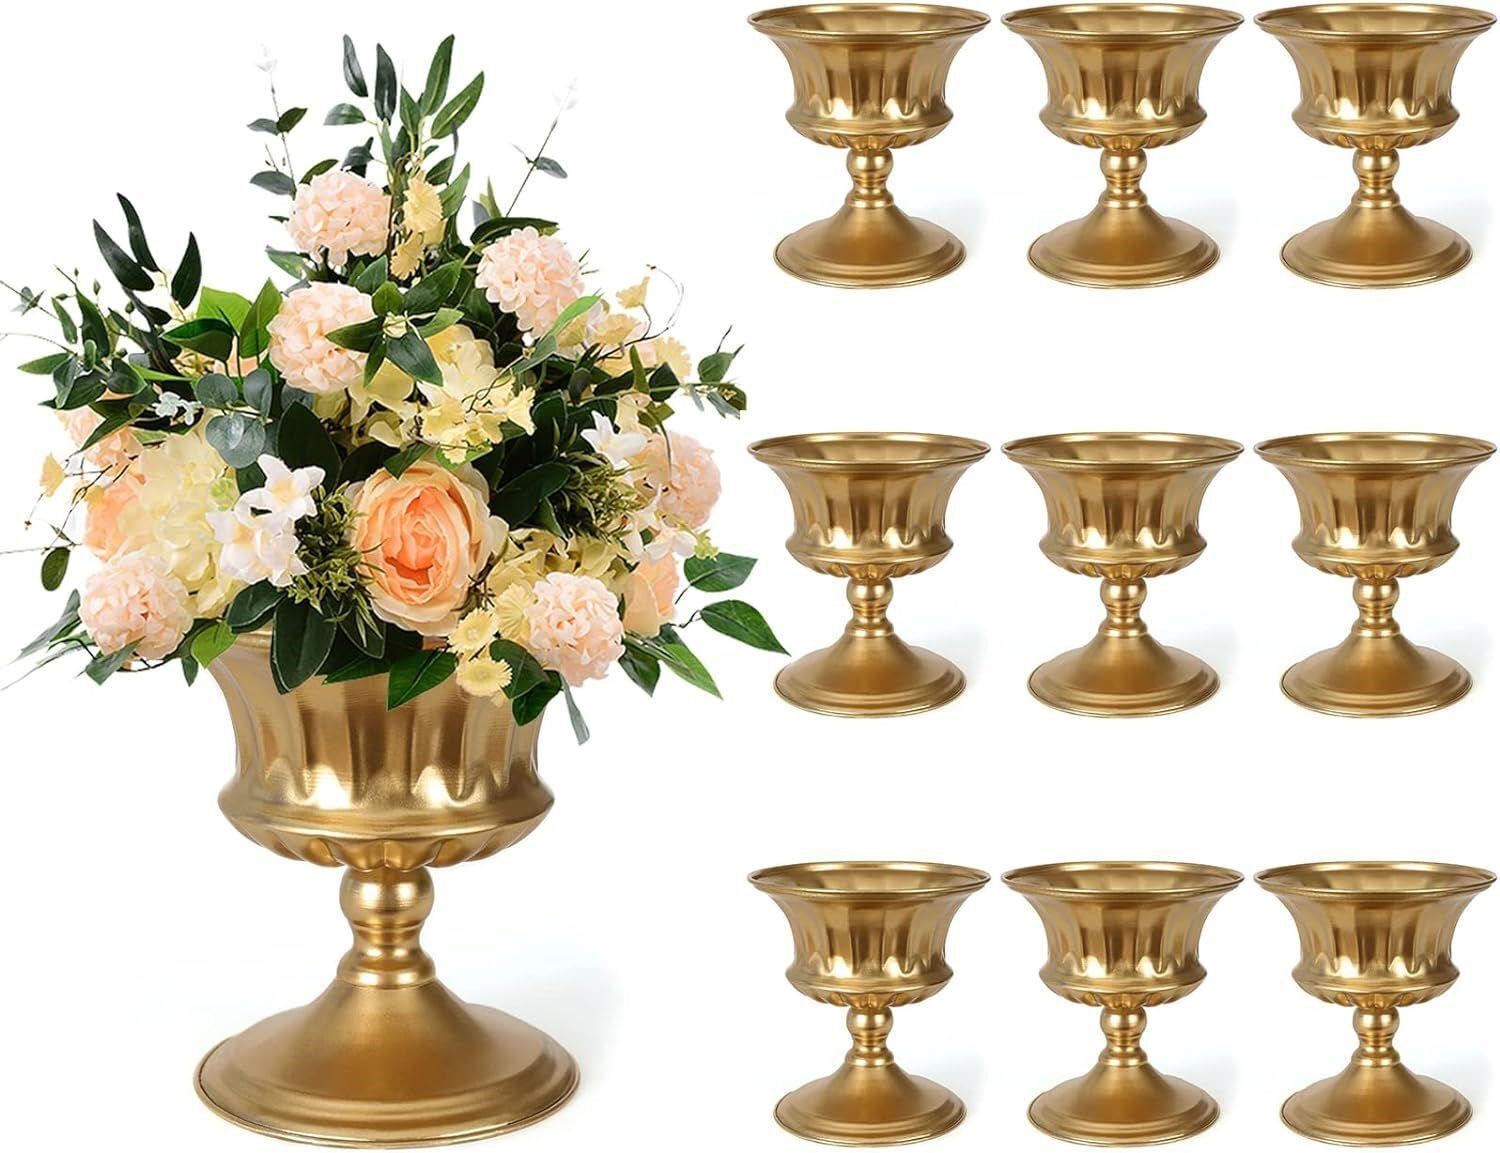 Gold Vases for Wedding Centerpieces, Set of 10